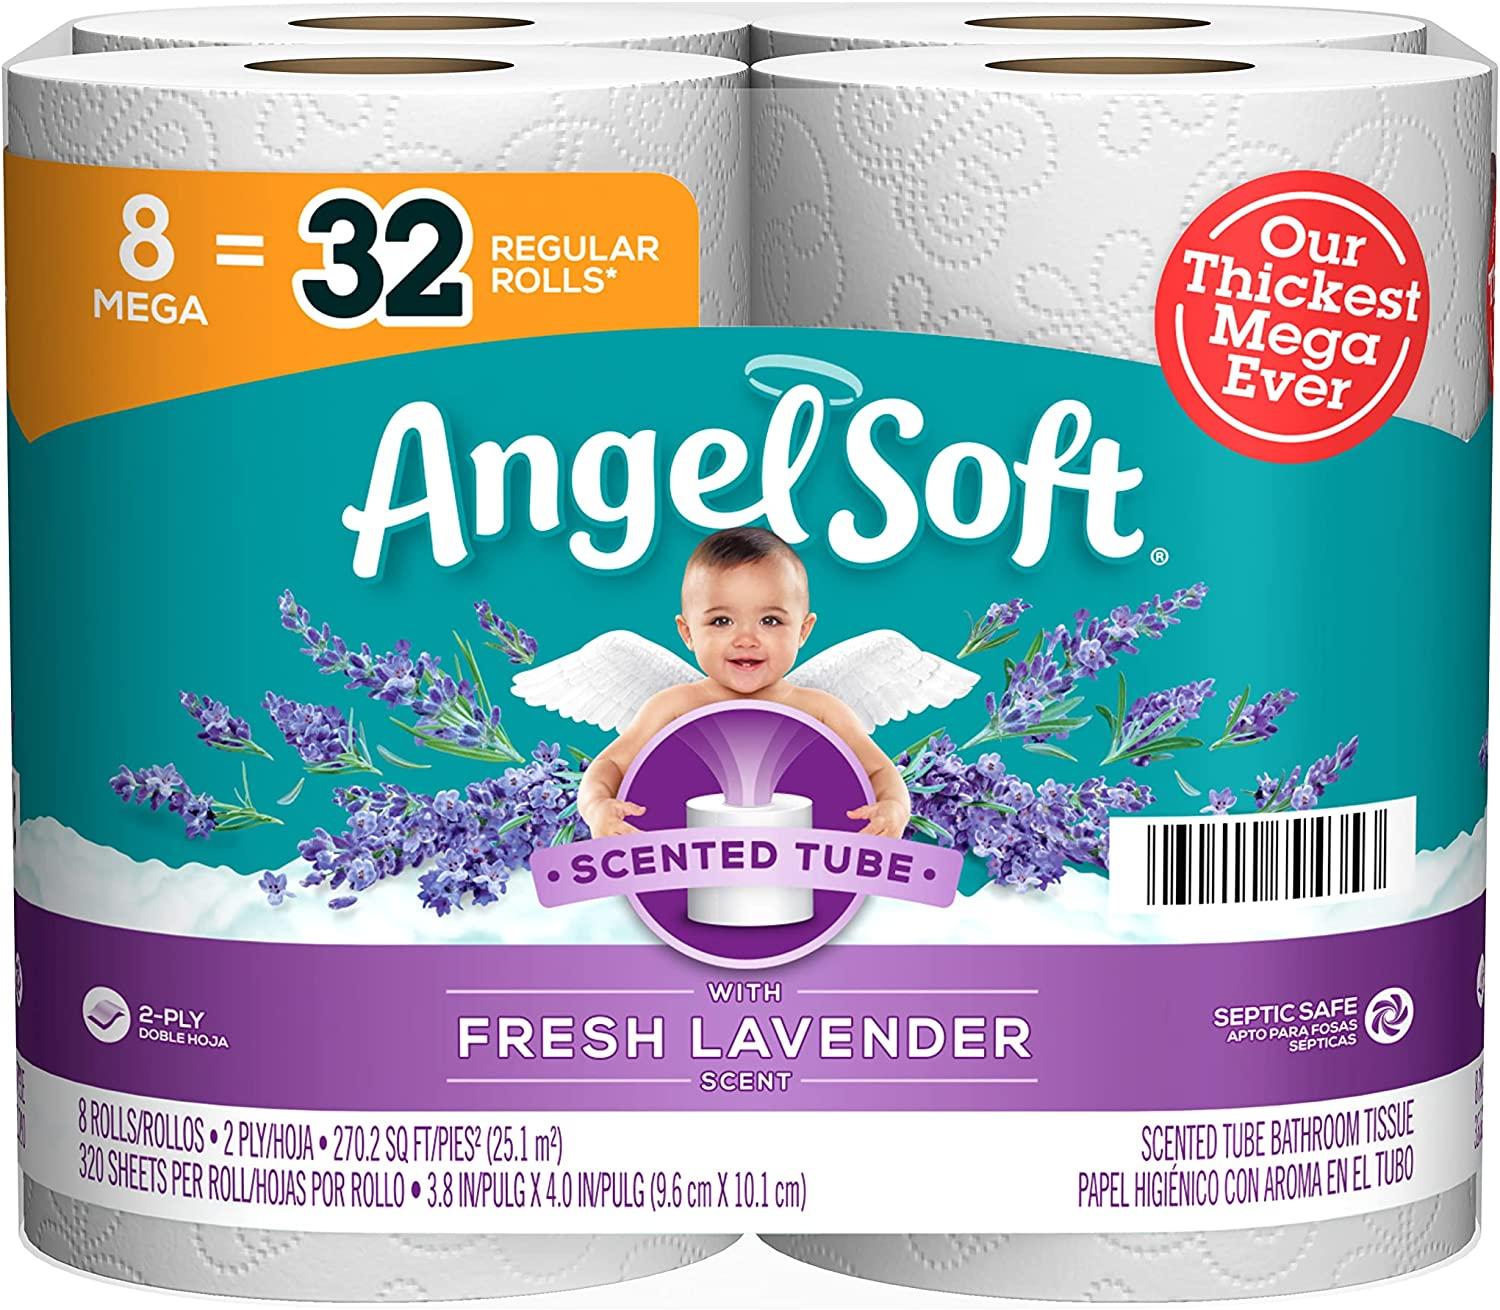 8 Angel Soft Toilet Paper for $5.99